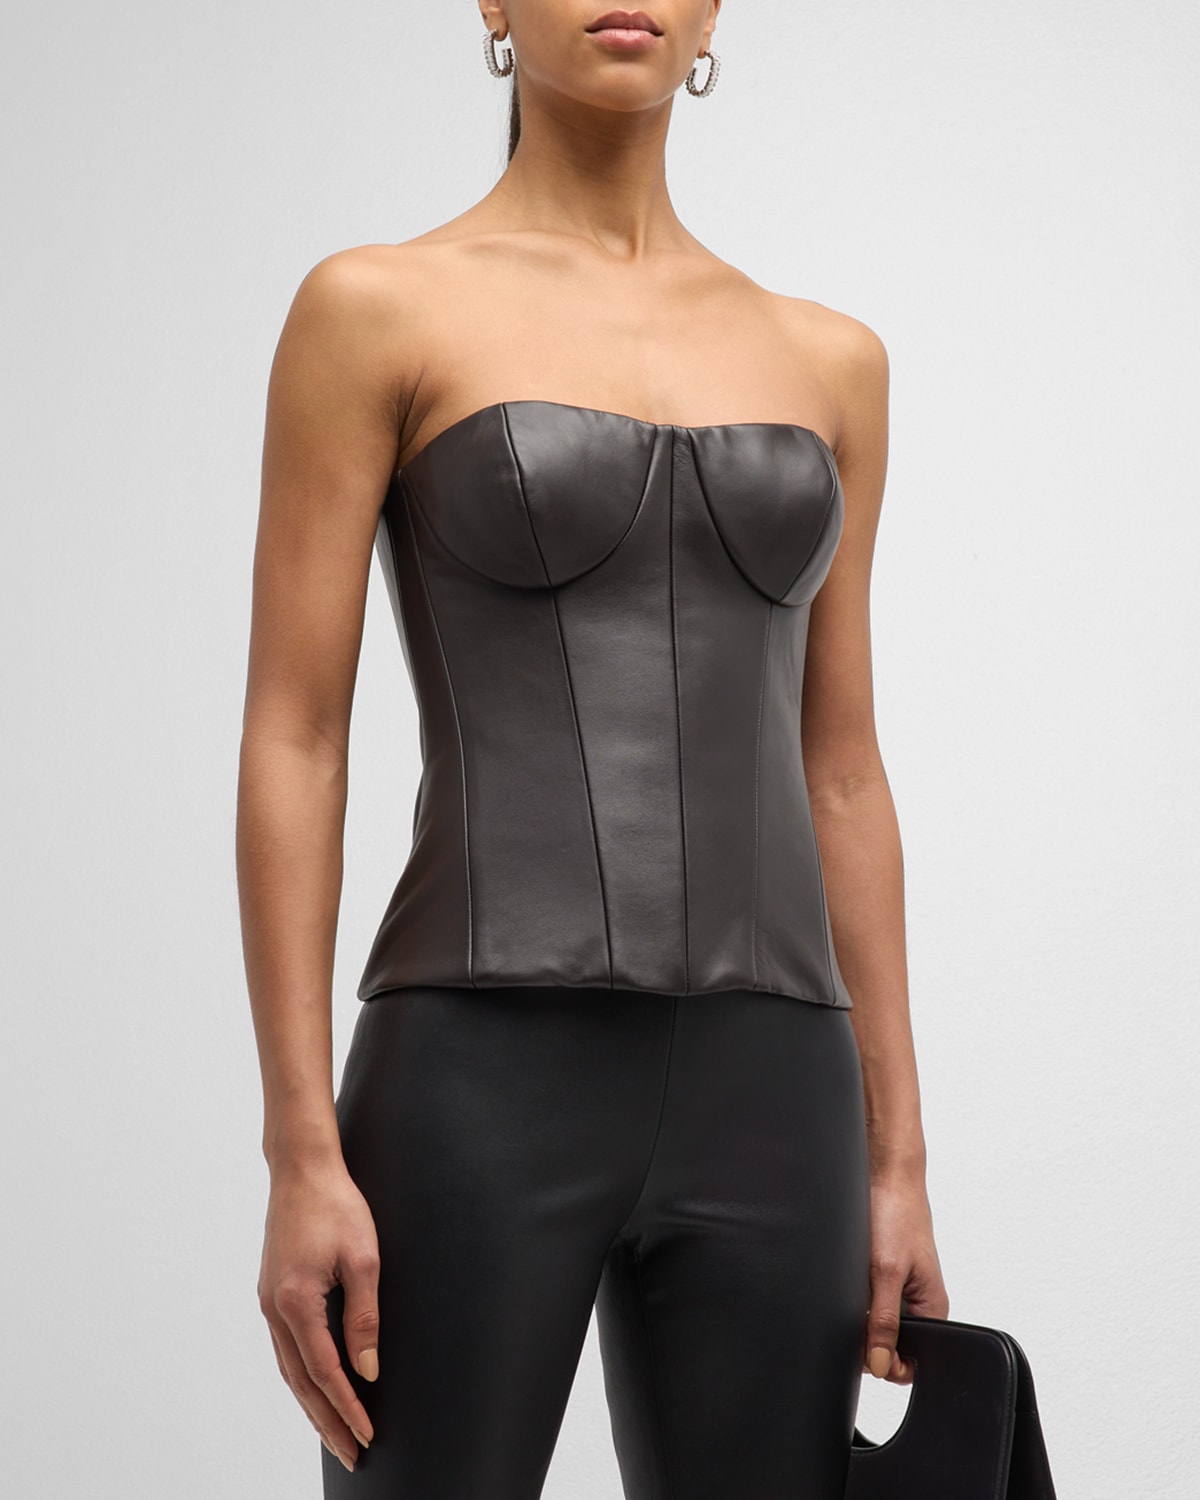 SERGIO HUDSON LEATHER BUSTIER TOP